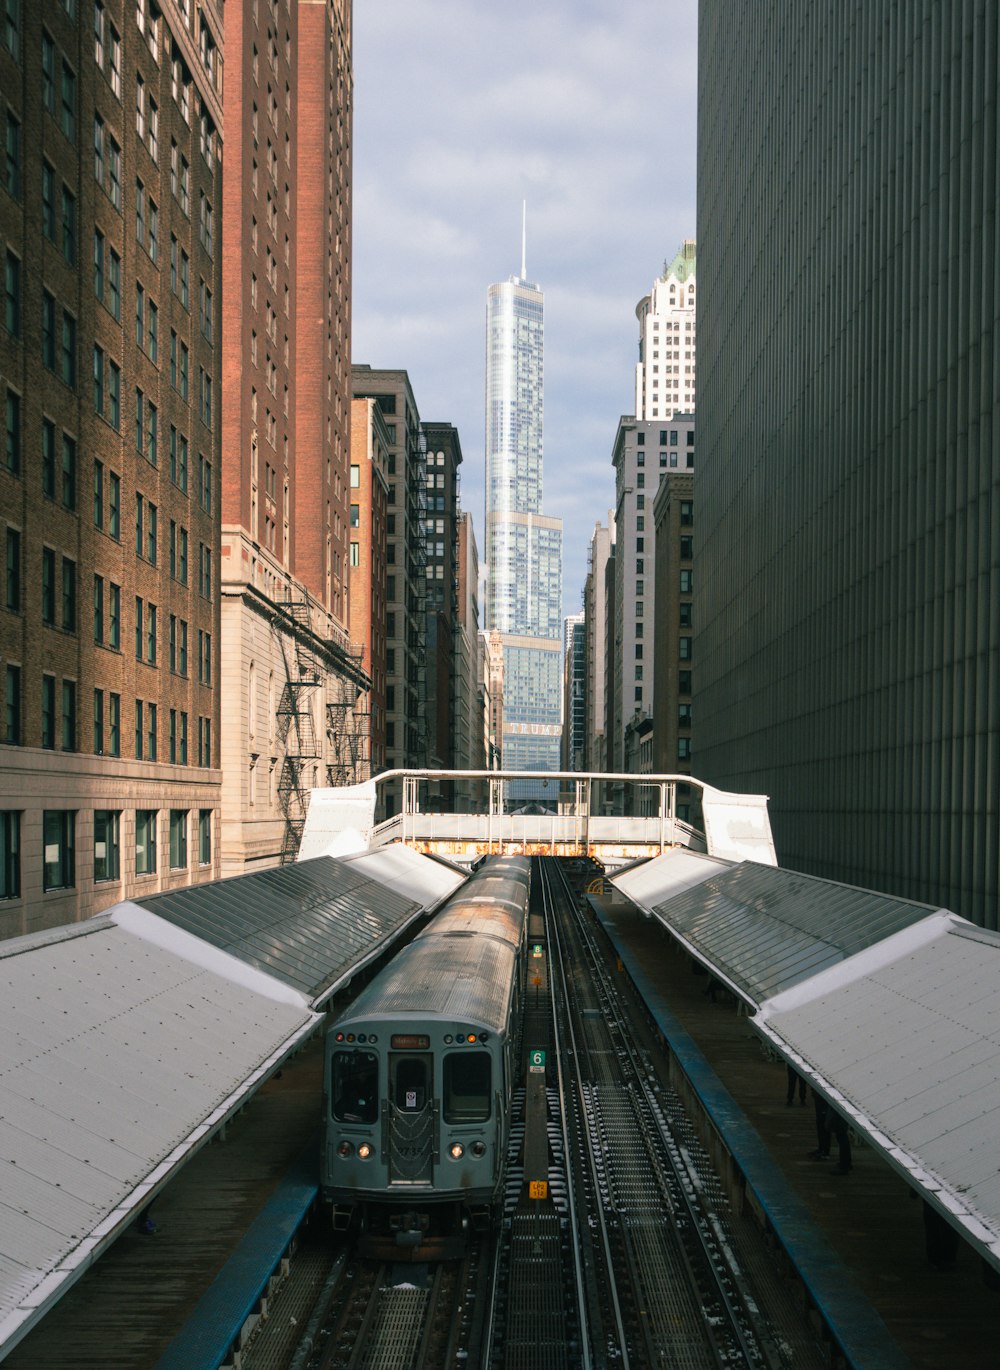 a train traveling through a city next to tall buildings